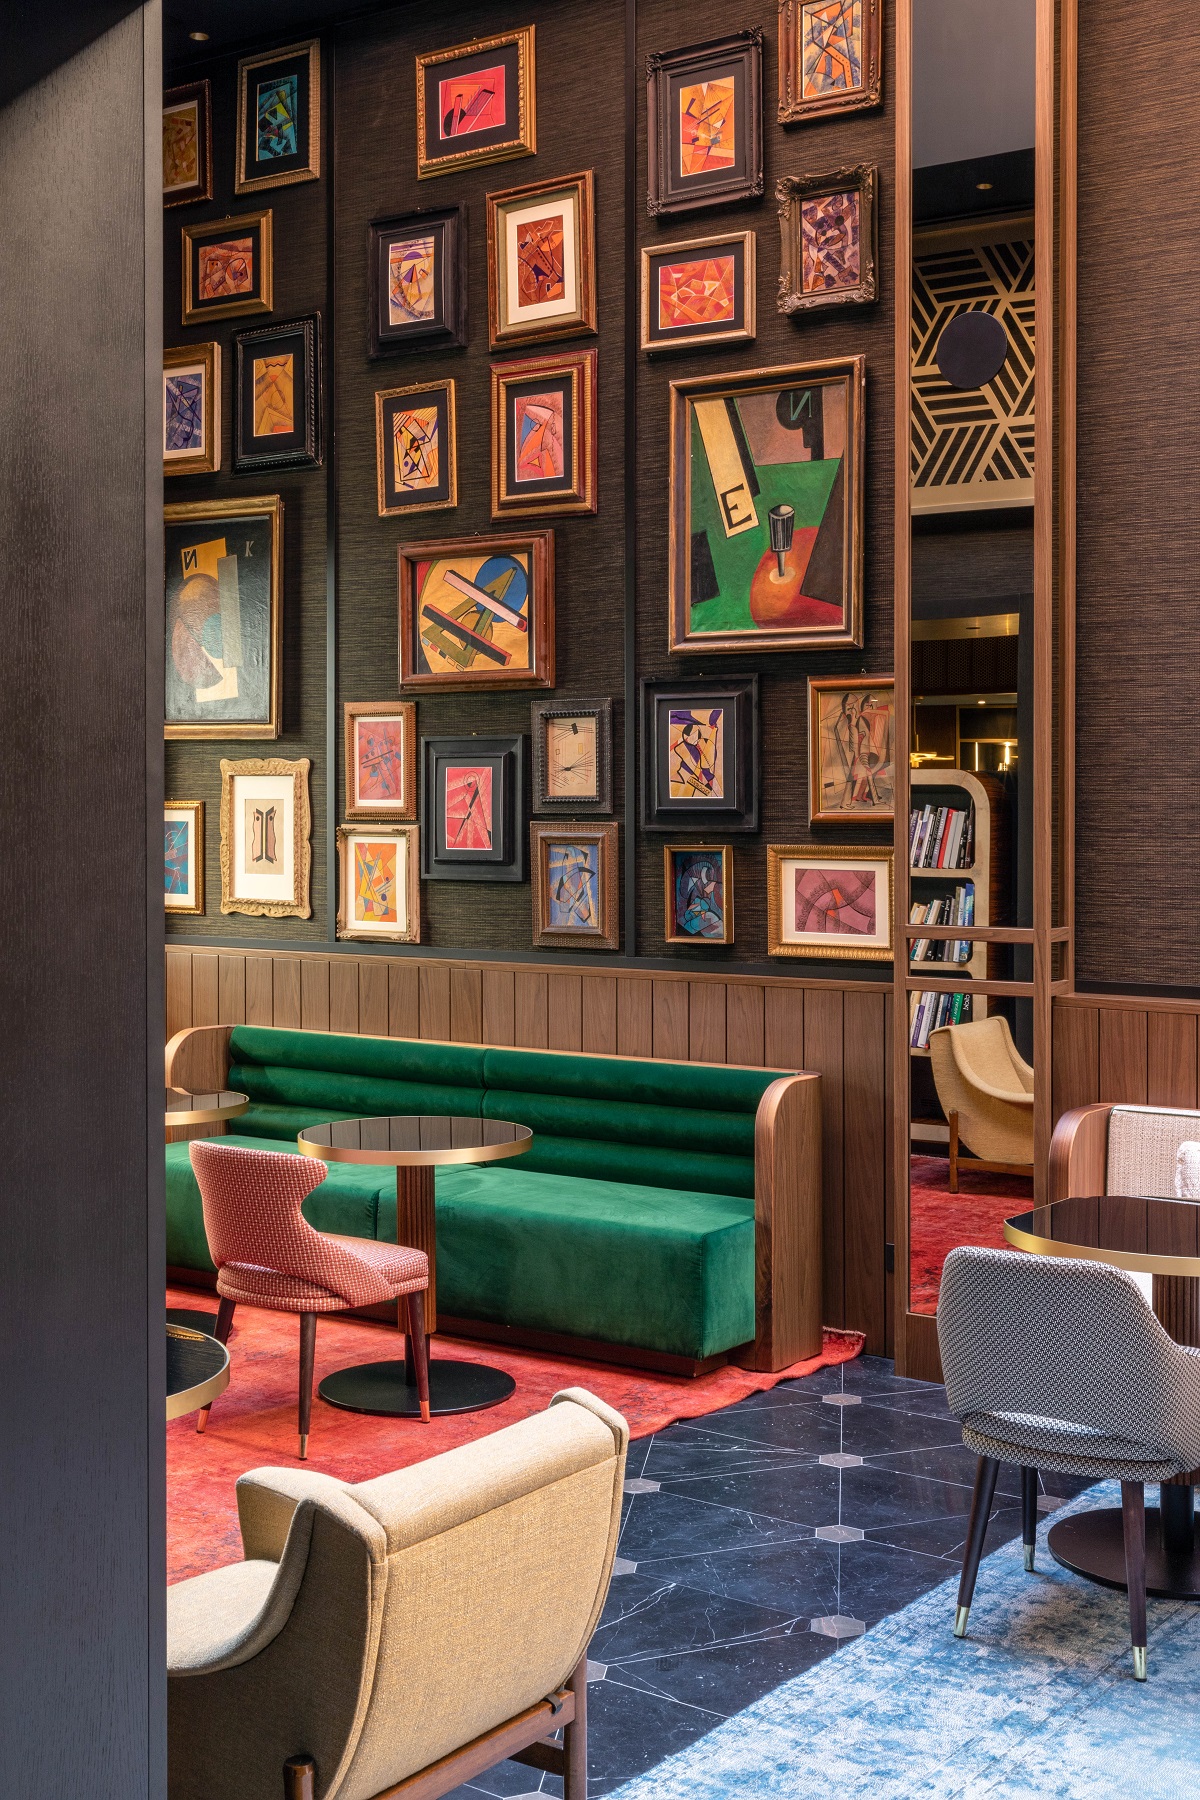 public seating in hotel lobby with green couch and colourful prints